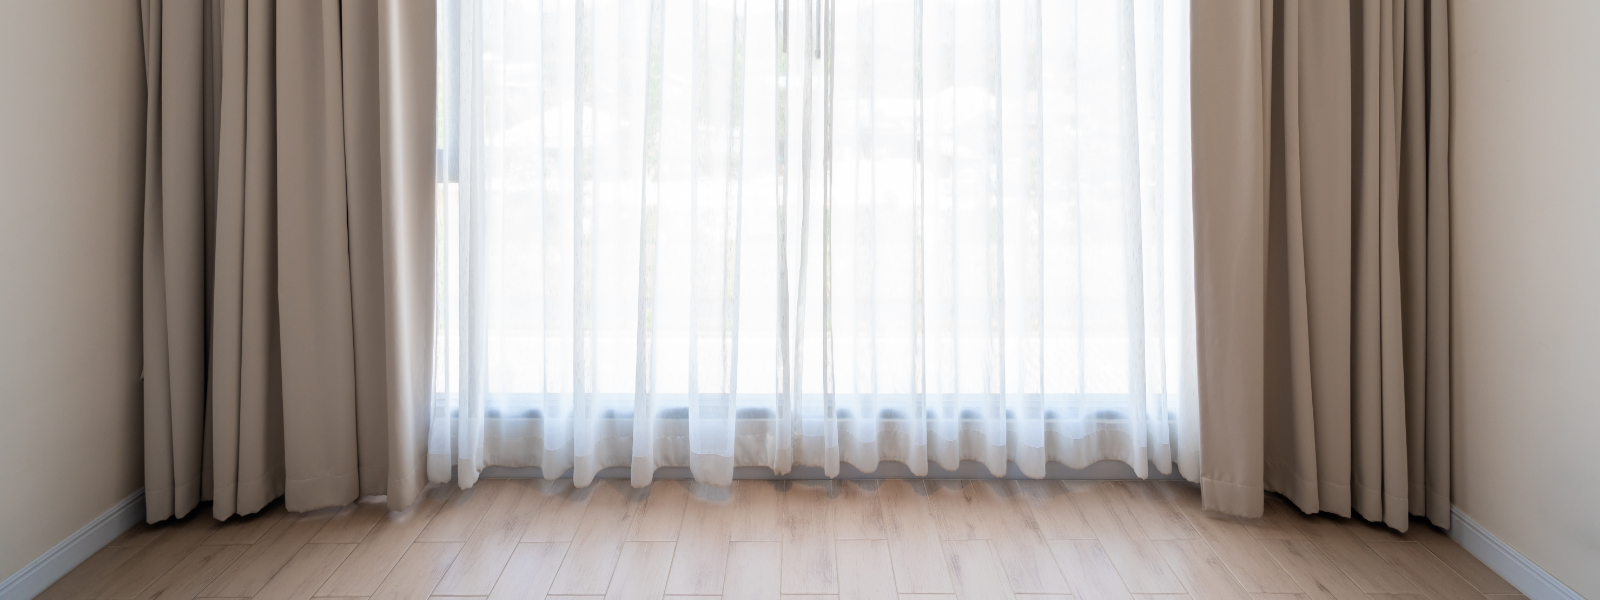 KARDINAPOISID OÜ - lamella curtains, blinds with hidden mechanisms, day and night roller blinds, zebra roller blinds, fas...